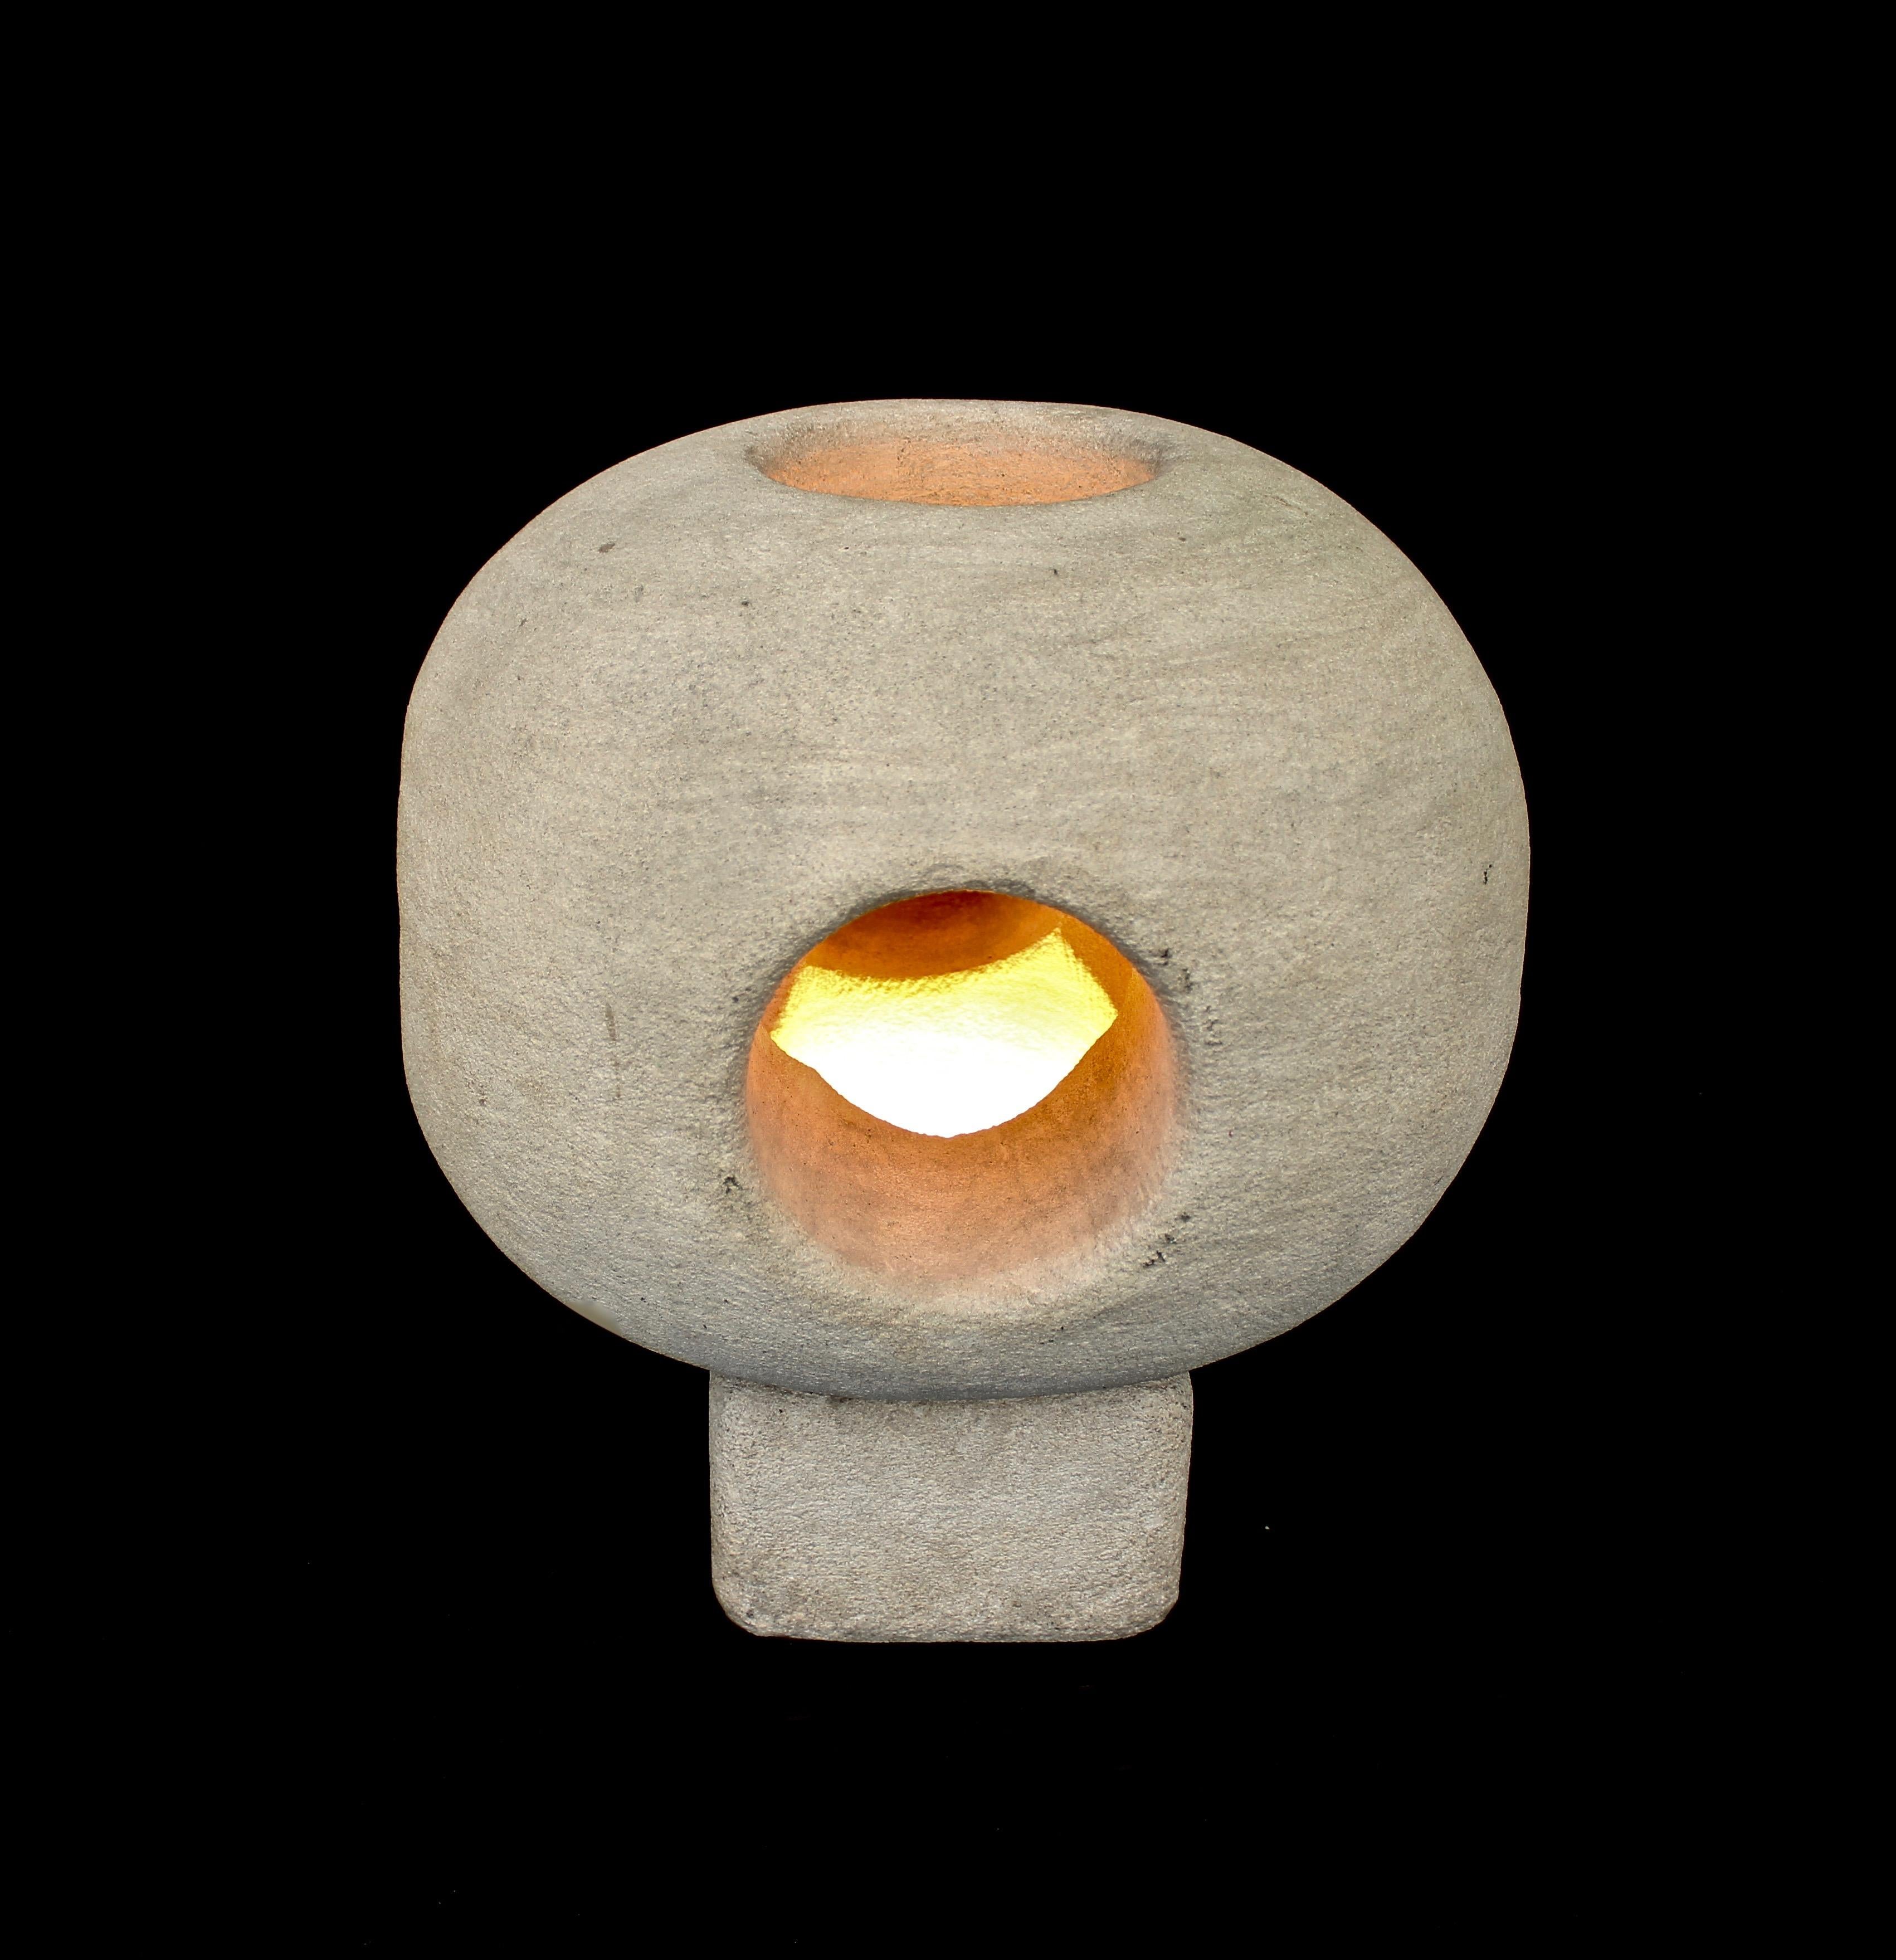 A solid carved French limestone sculptural table lamp by Albert Tormos.
The lamp is a porous French buffa or limestone that is hand carved into a round top with openings on each and top for the light to emit a soft glow.
Upon close viewing the